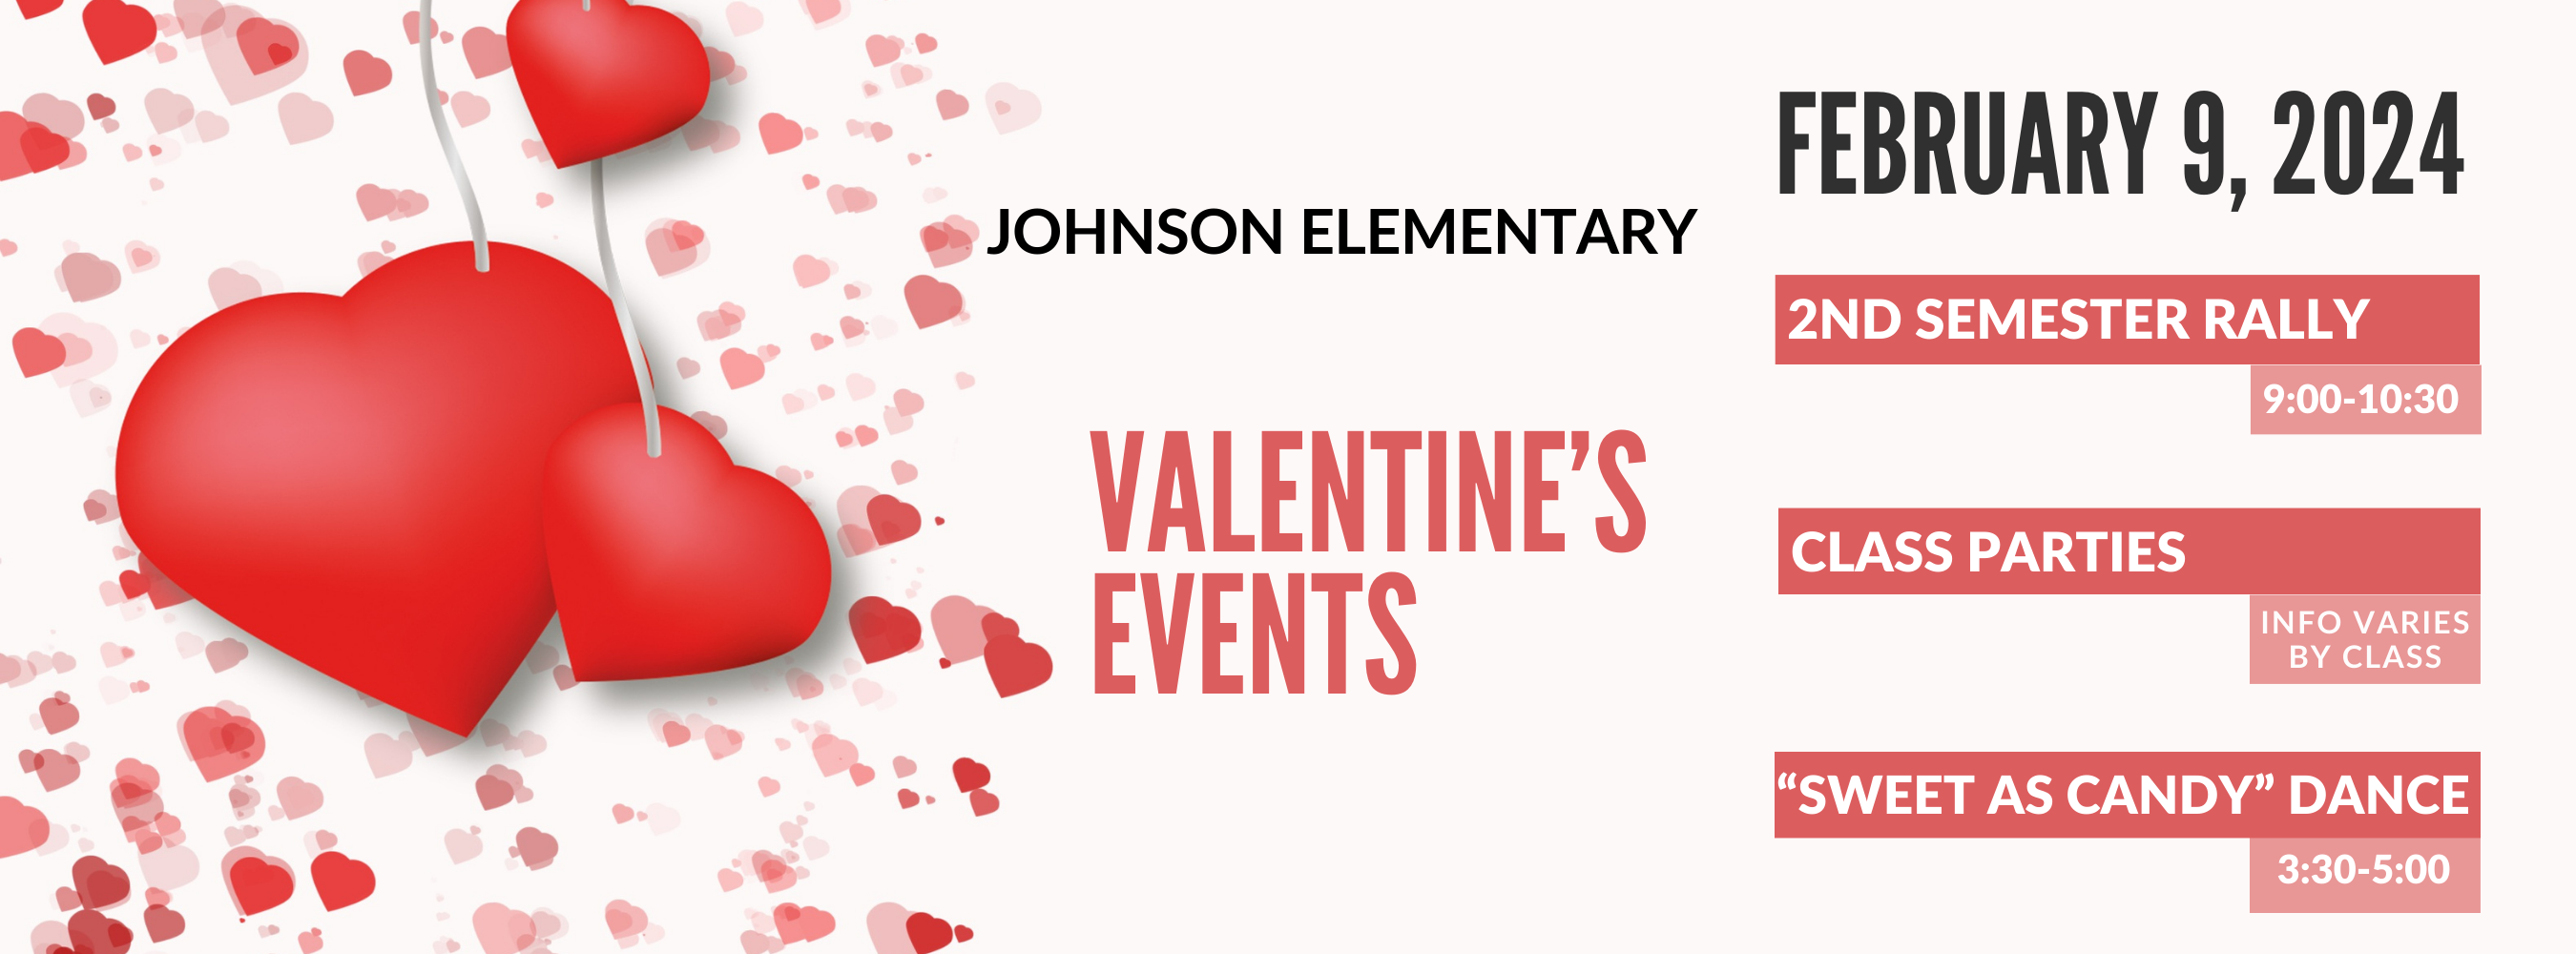 Johnson Valentine's Events: 2nd semester rally - 9:00-10:30, class parties - varies by class, "Sweet as Candy" dance - 3:30-5:00